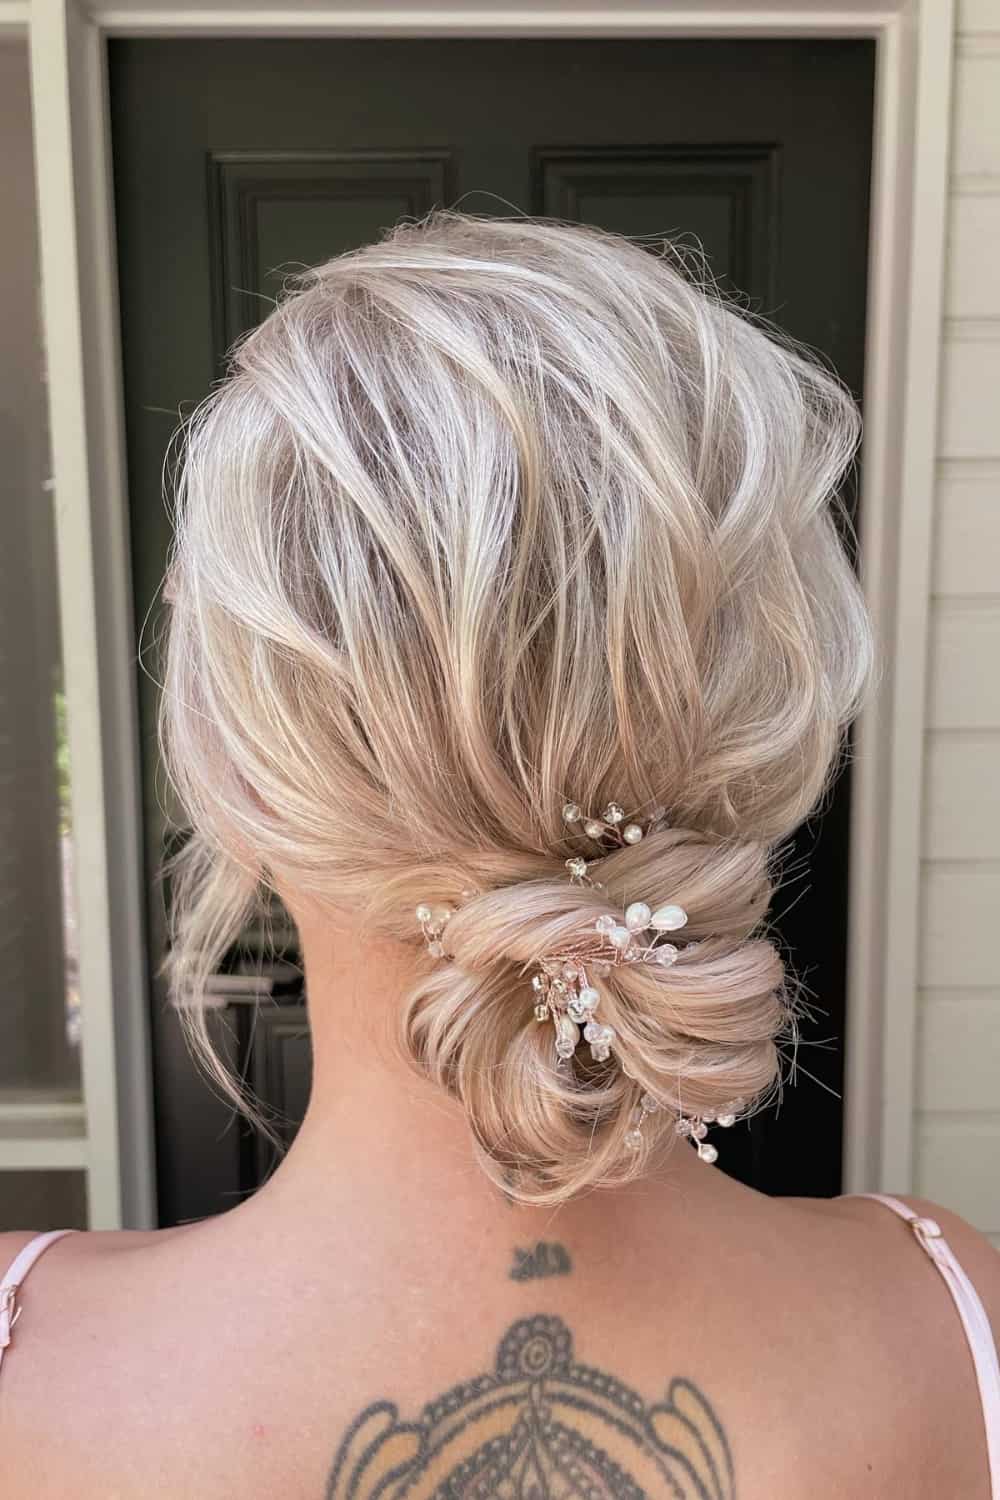 Party Hair Style for Long Hair - Jeweled Bun